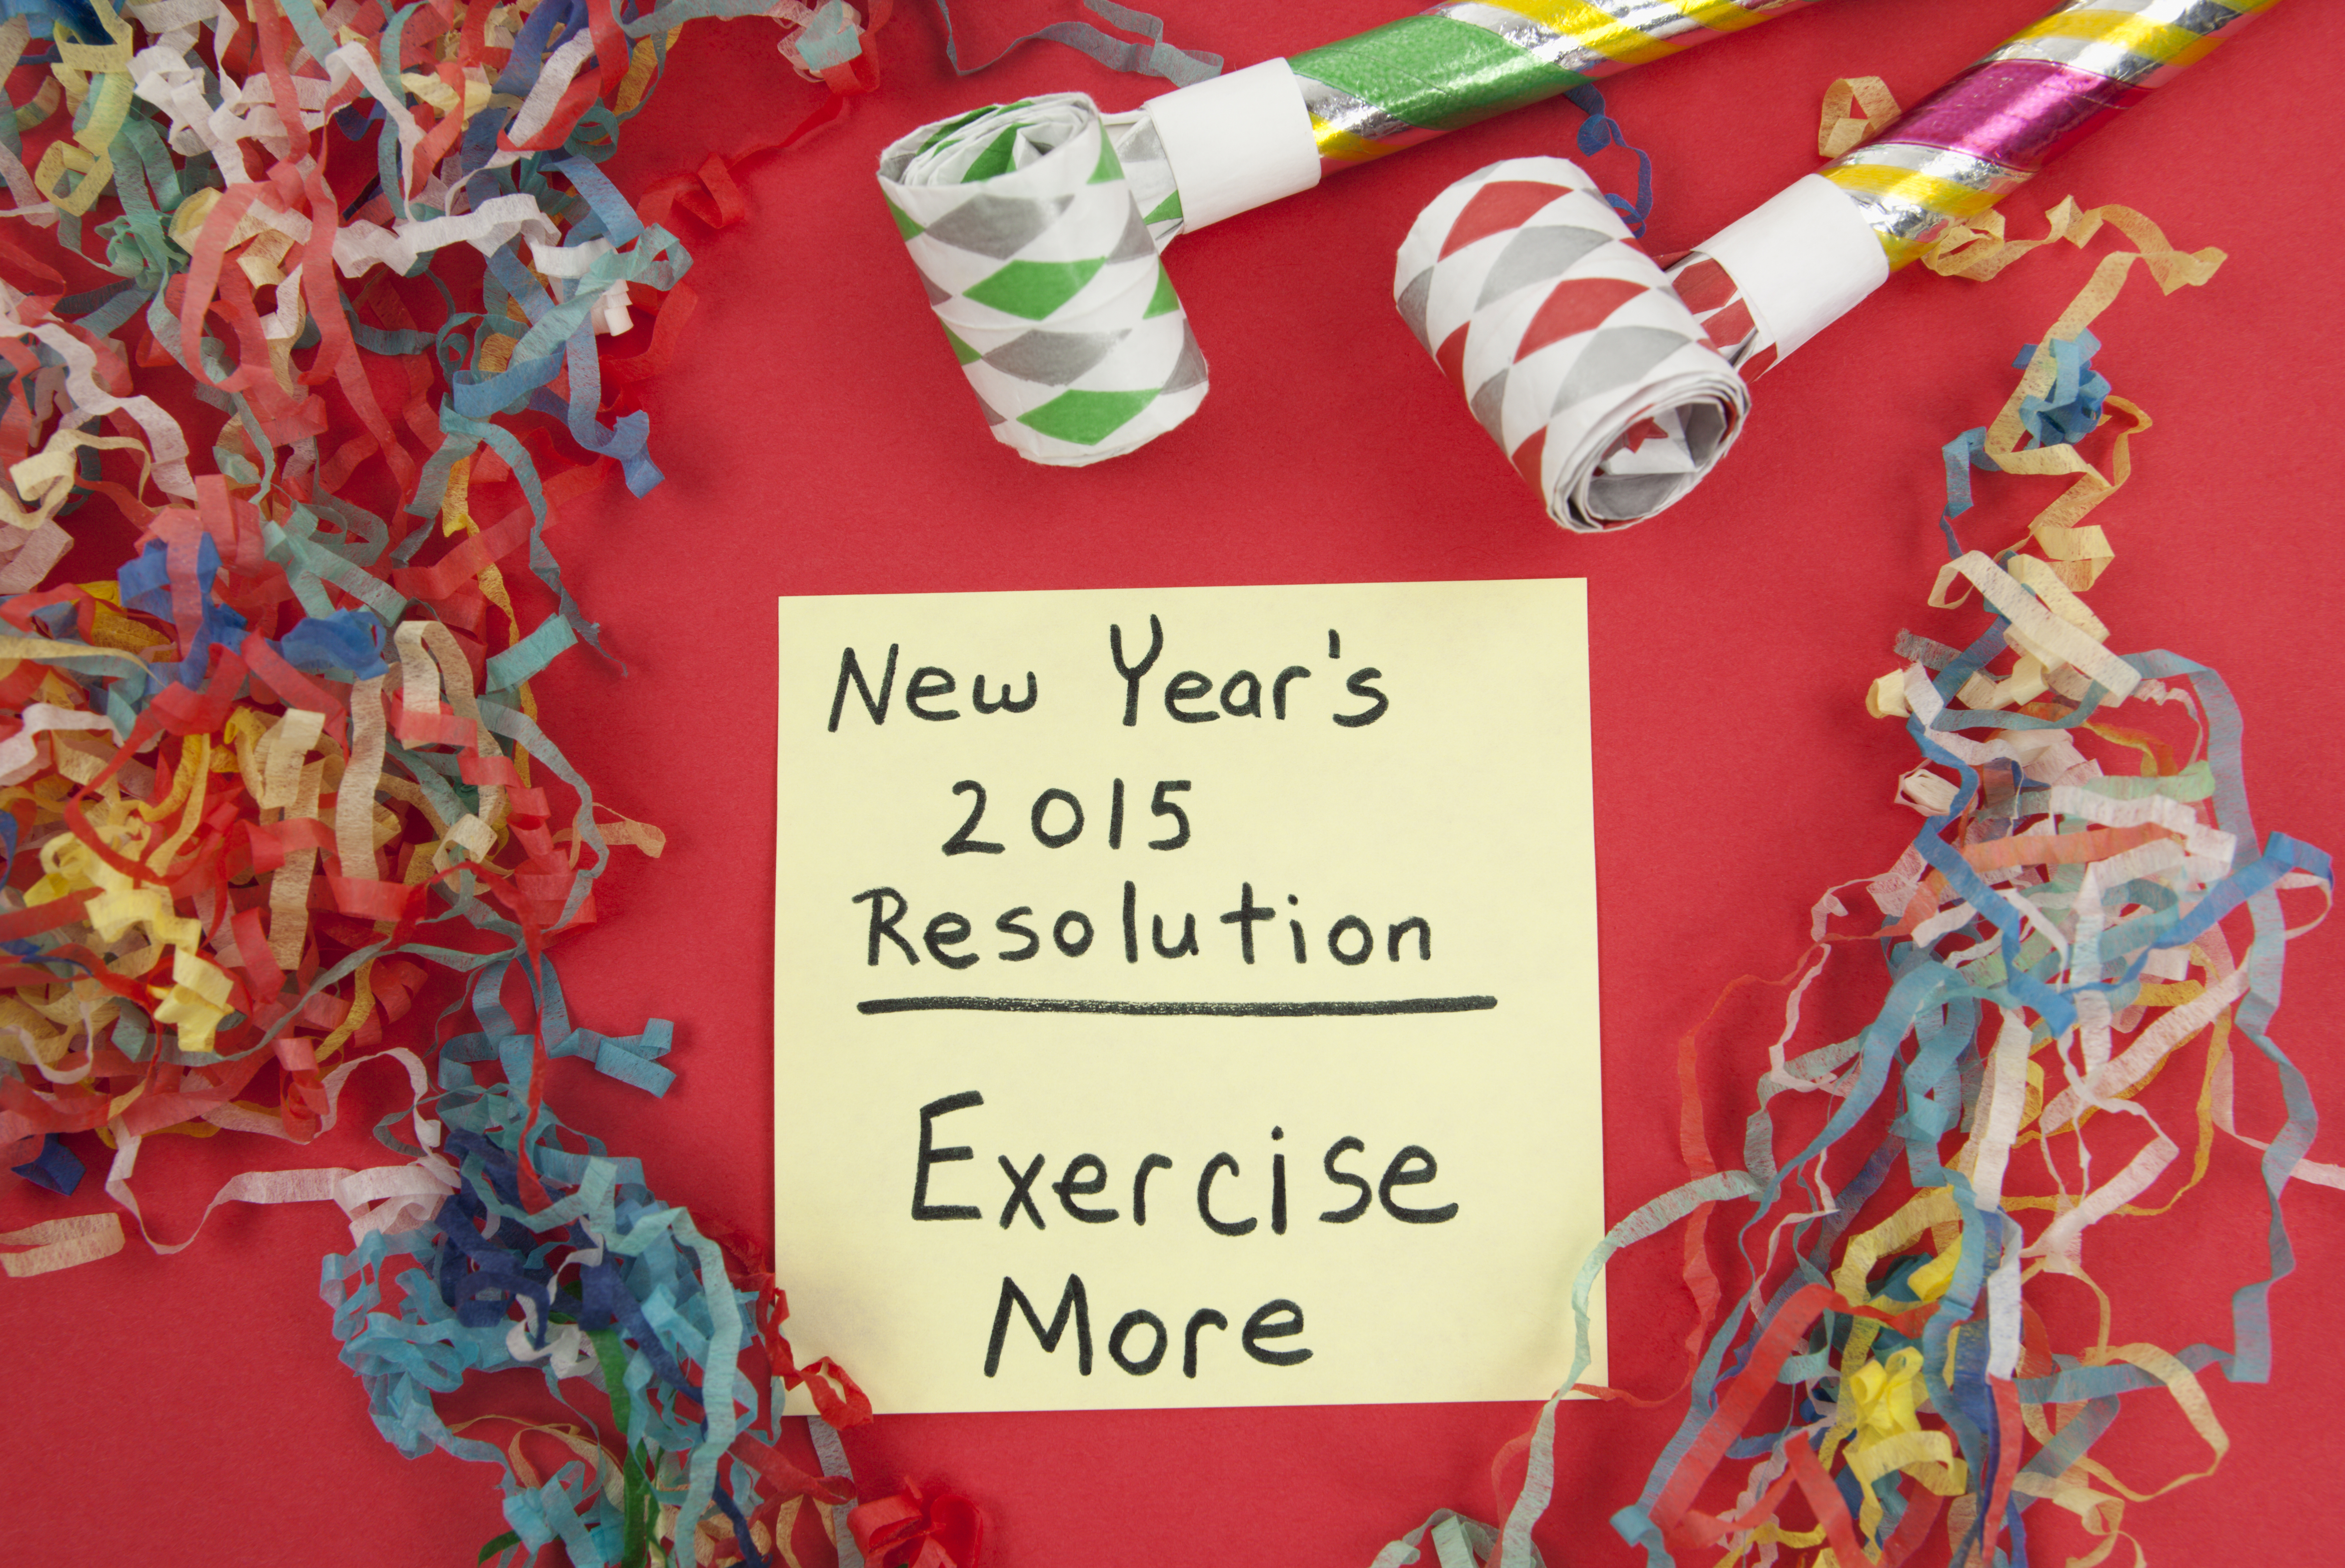 New Year's resolution to exercise more.